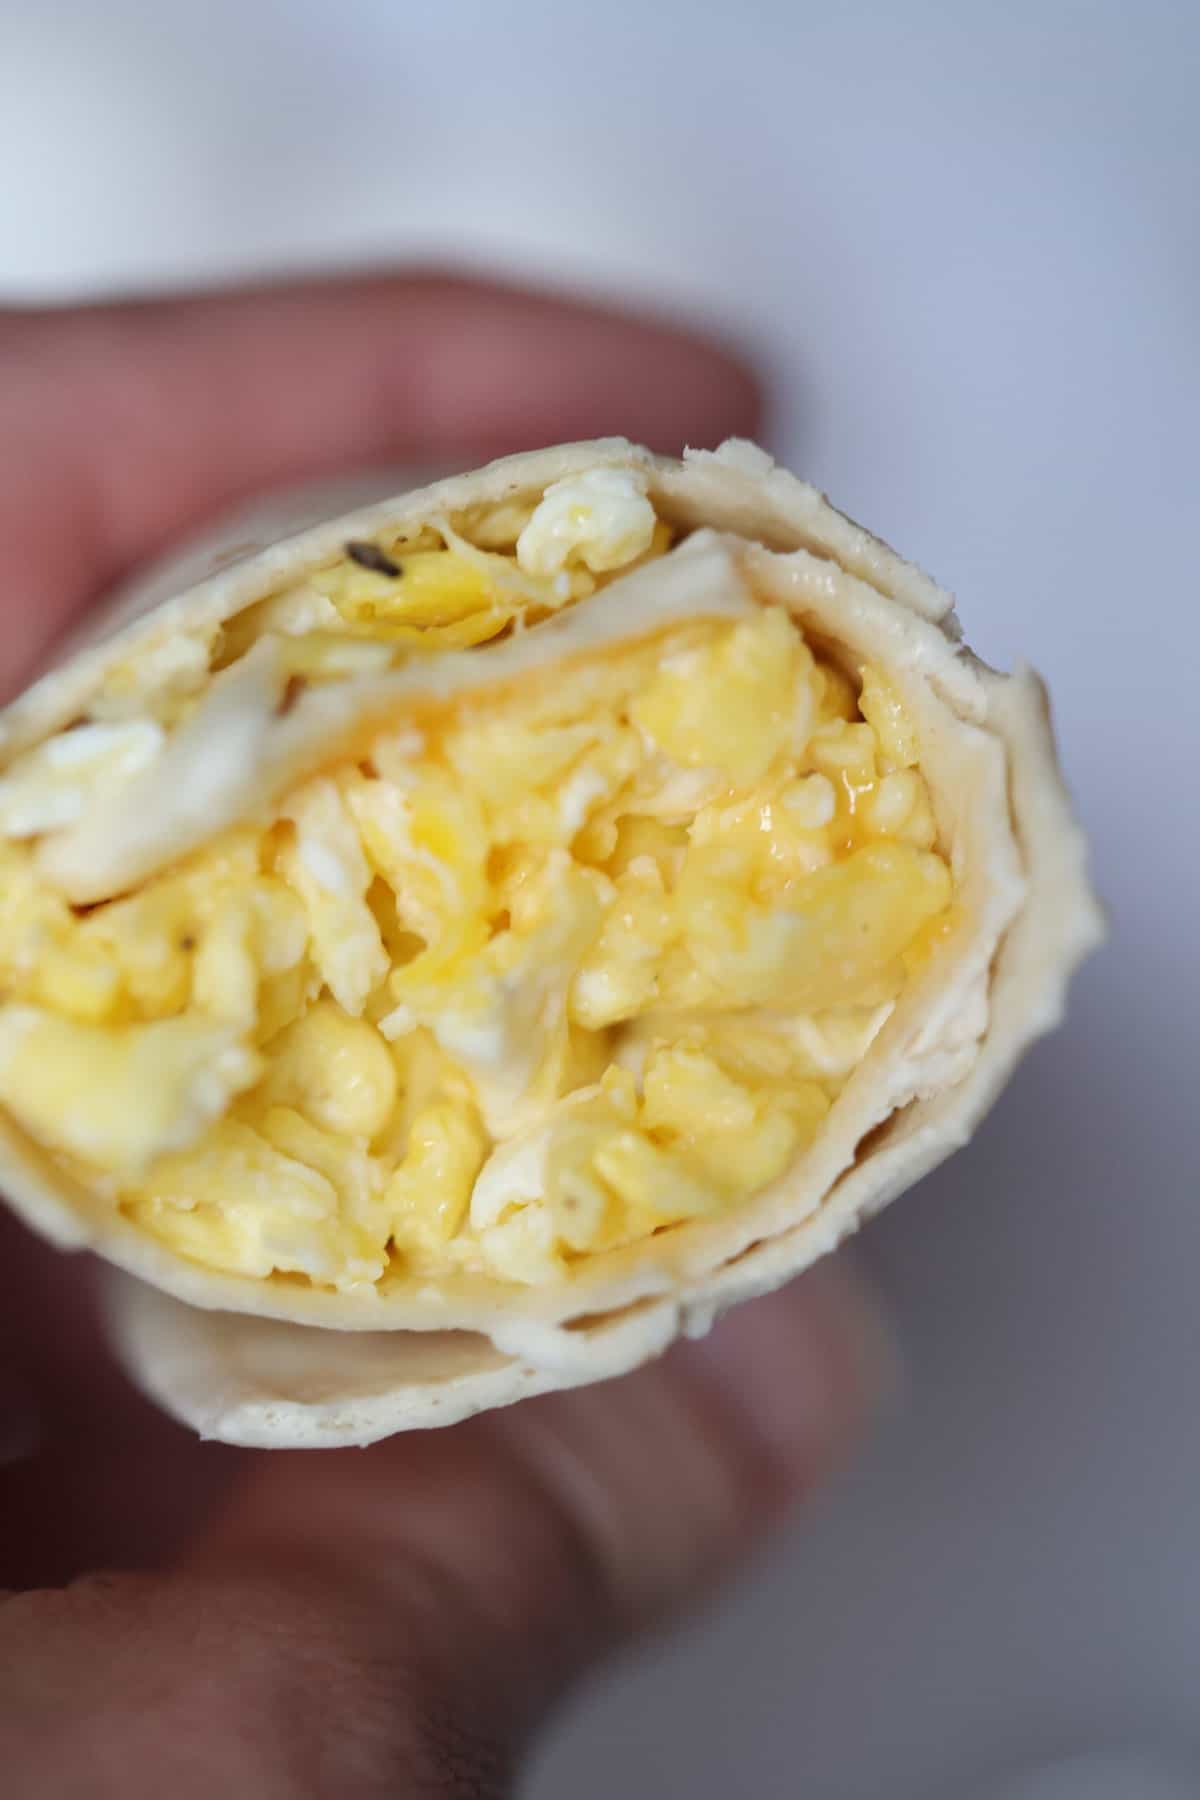 breakfast burrito with egg and cheese held in a hand